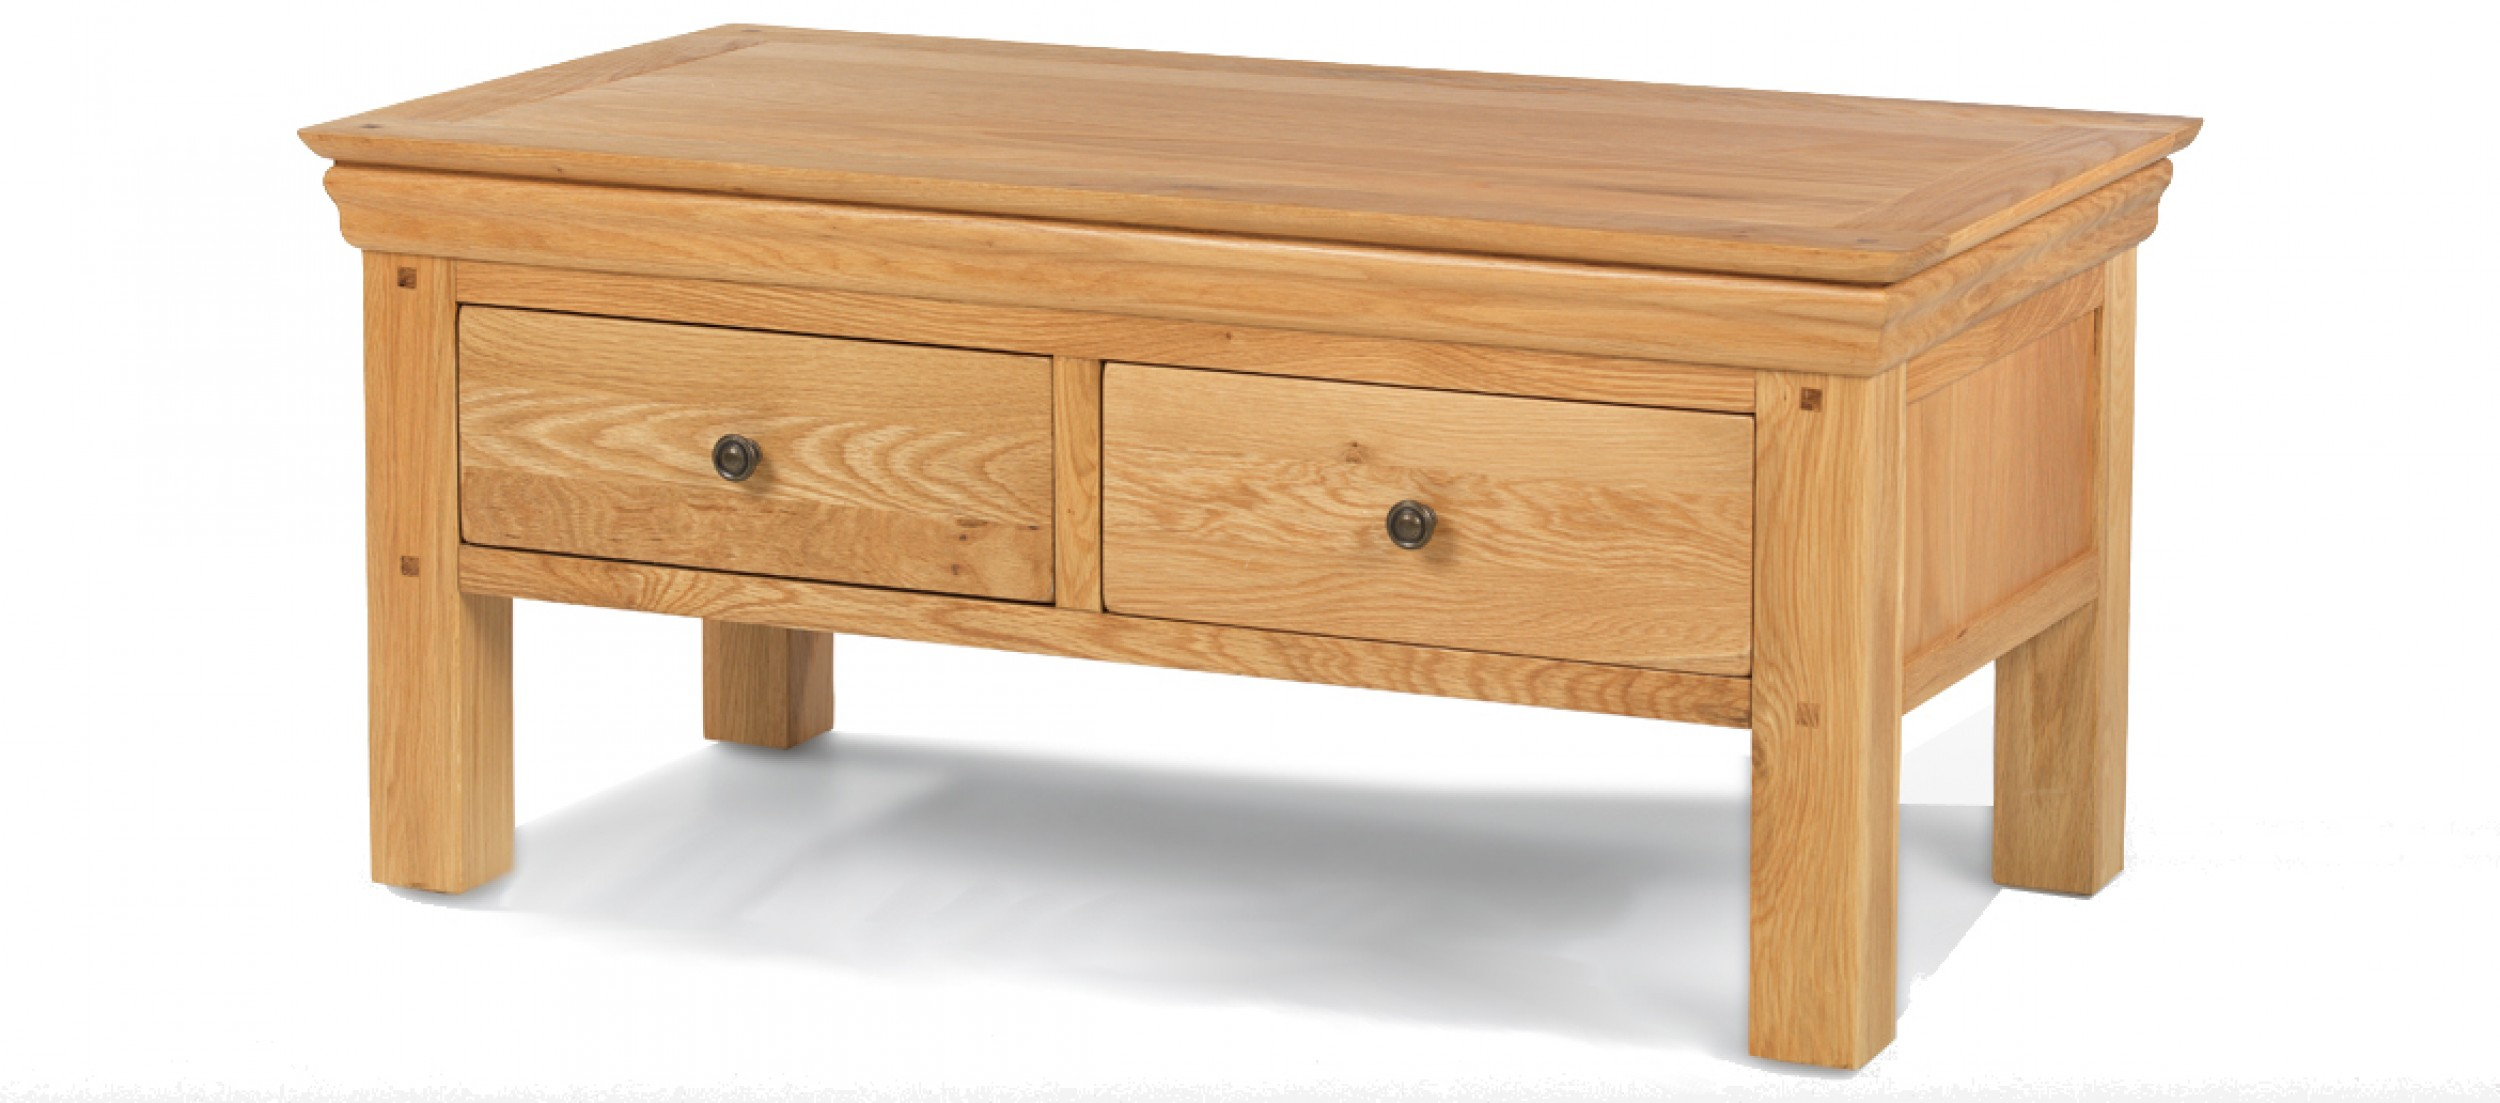 Constance Oak 4 Drawer Coffee Table Quercus Living intended for proportions 2500 X 1103